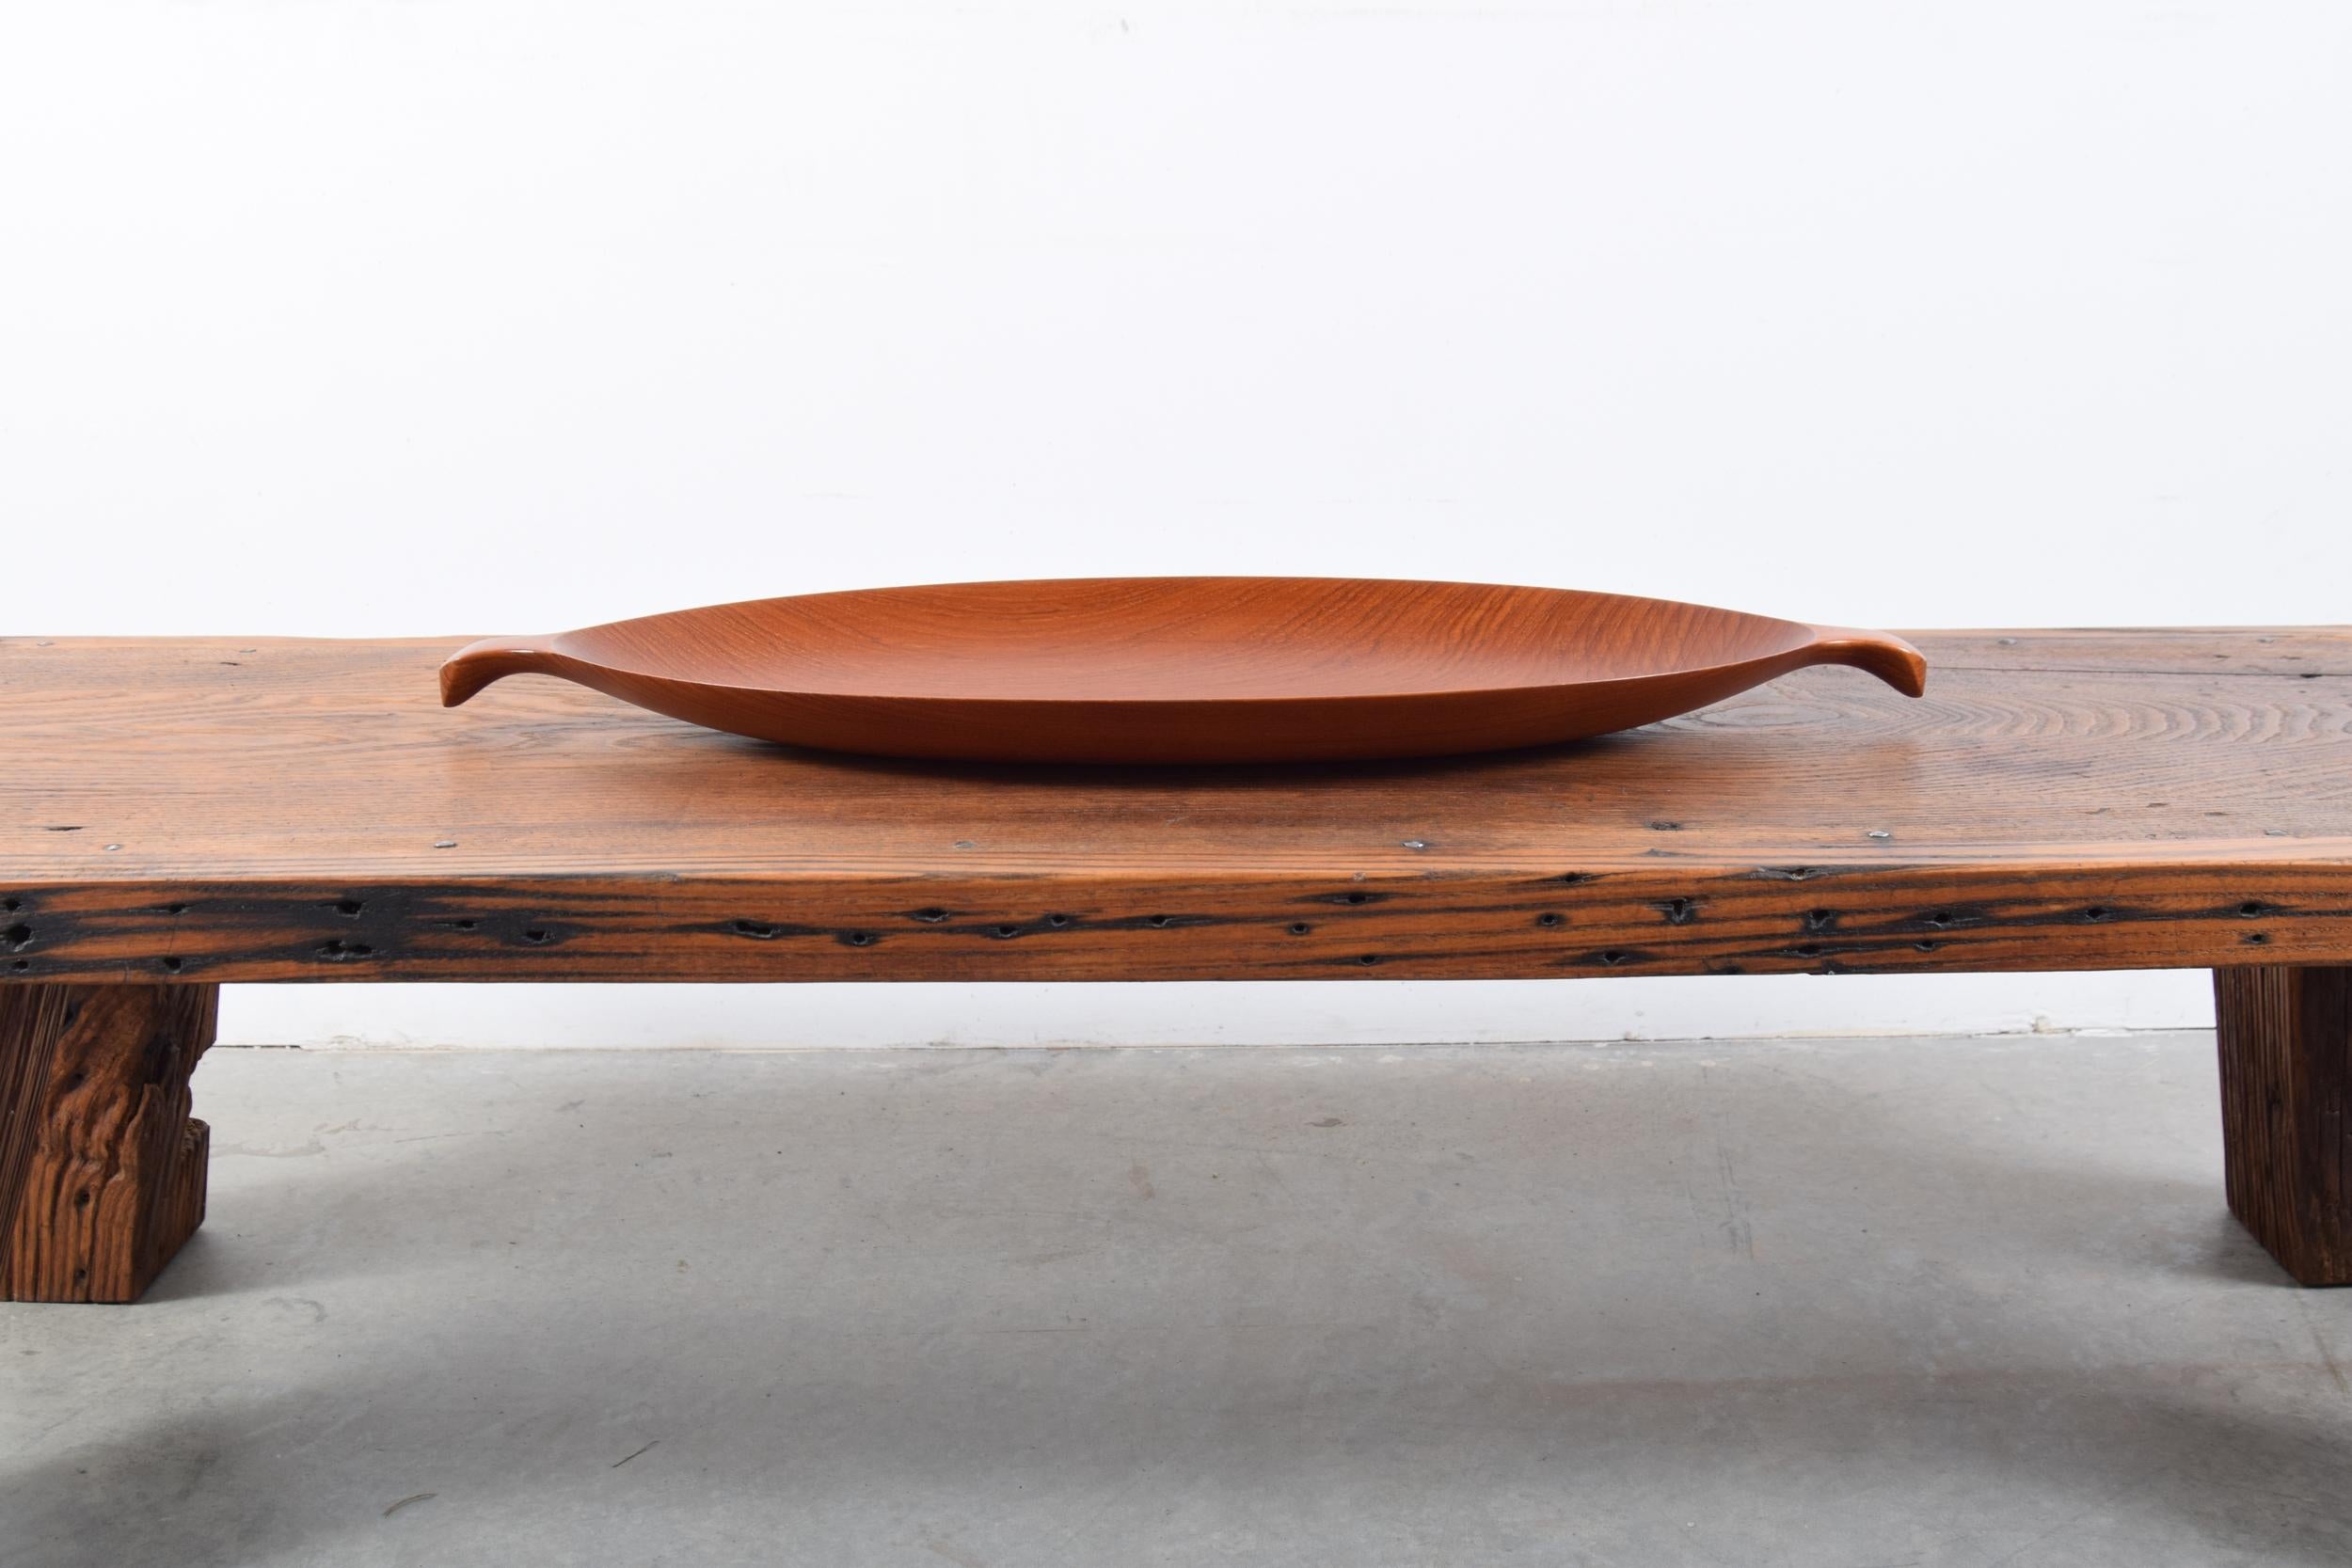 Magnificent and large solid teak tray, circa 1960. Produced by AL-BO of Denmark. The grain of the old growth teak is stunning. Patina to teak is absolutely perfect. Just what you would expect from a 60 year old piece of well kept teak. Tray